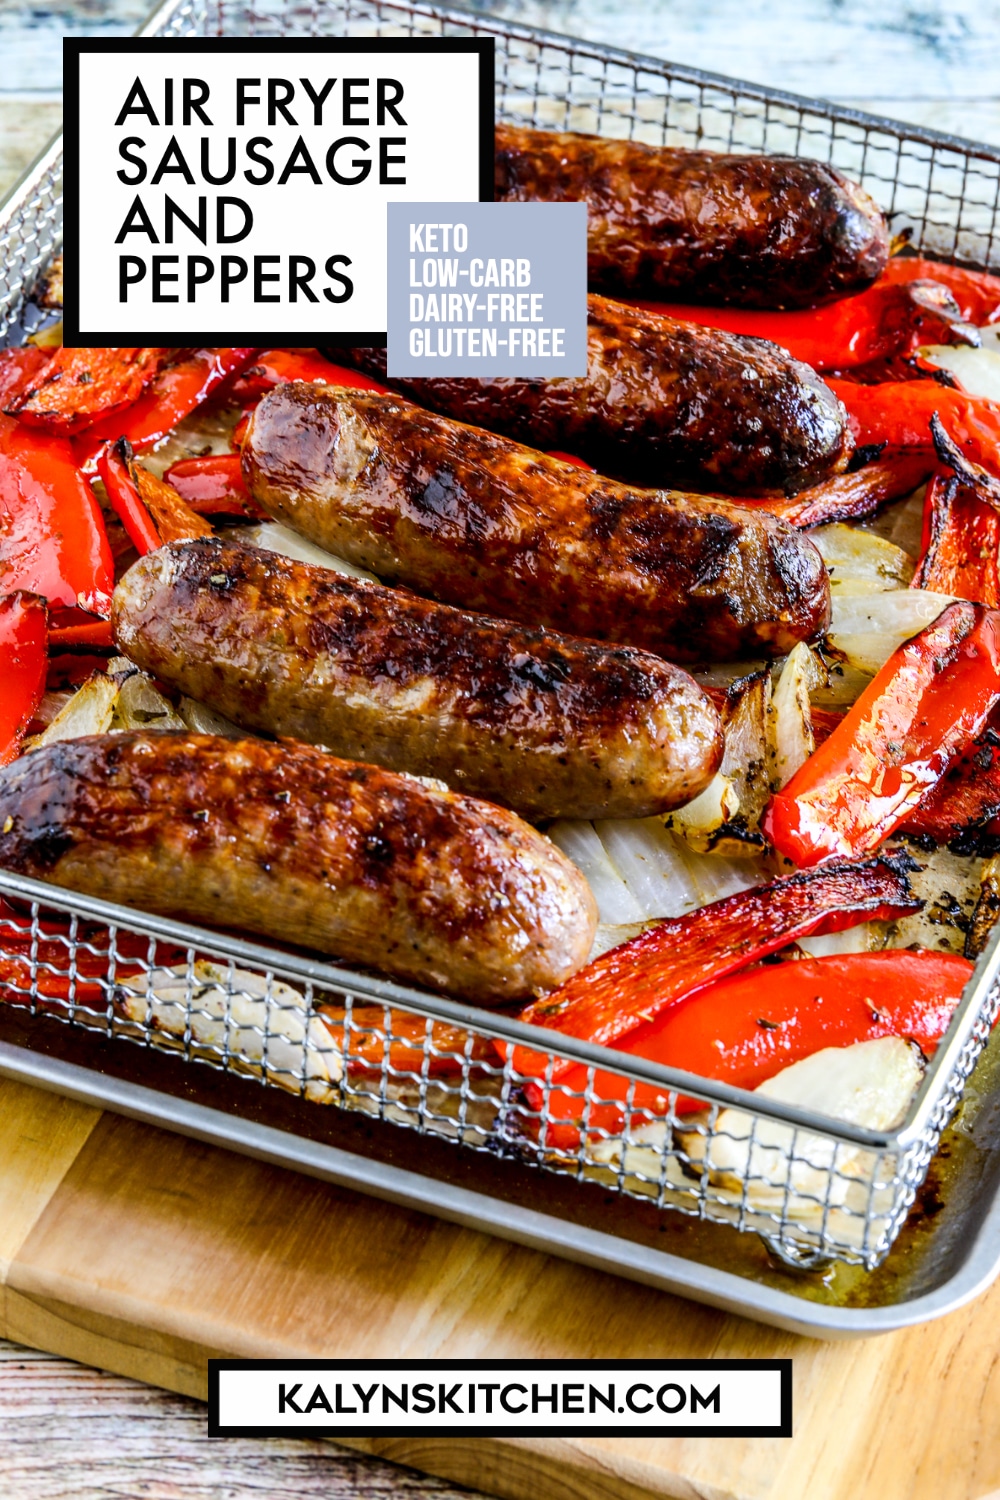 Pinterest image of Air Fryer Sausage and Peppers